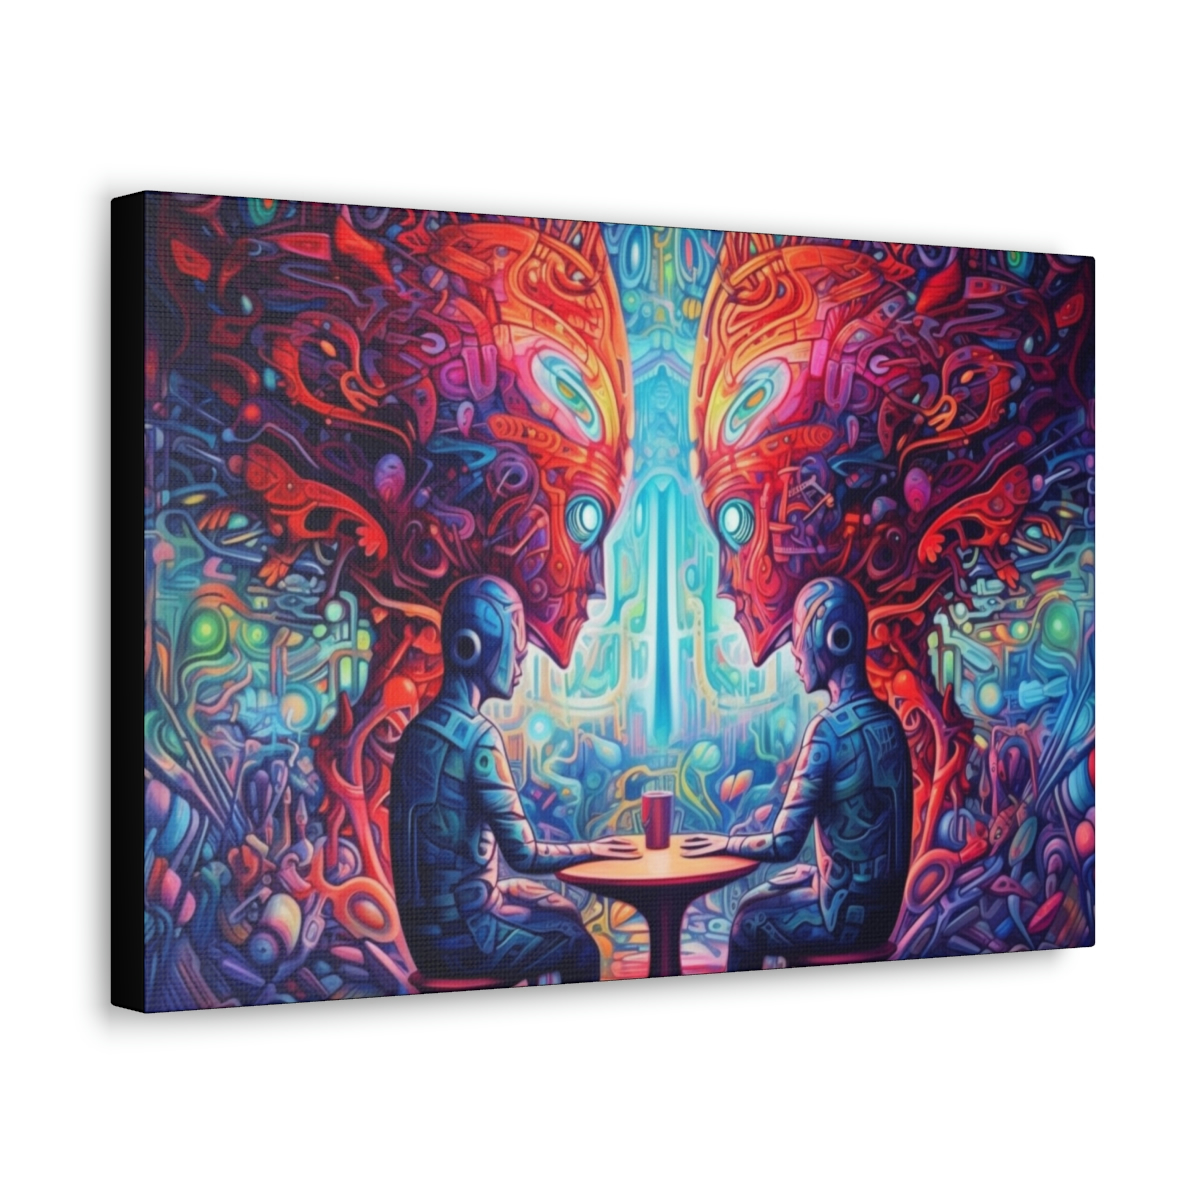 DMT Art Canvas Print: A Quick Chat At The End Of Time